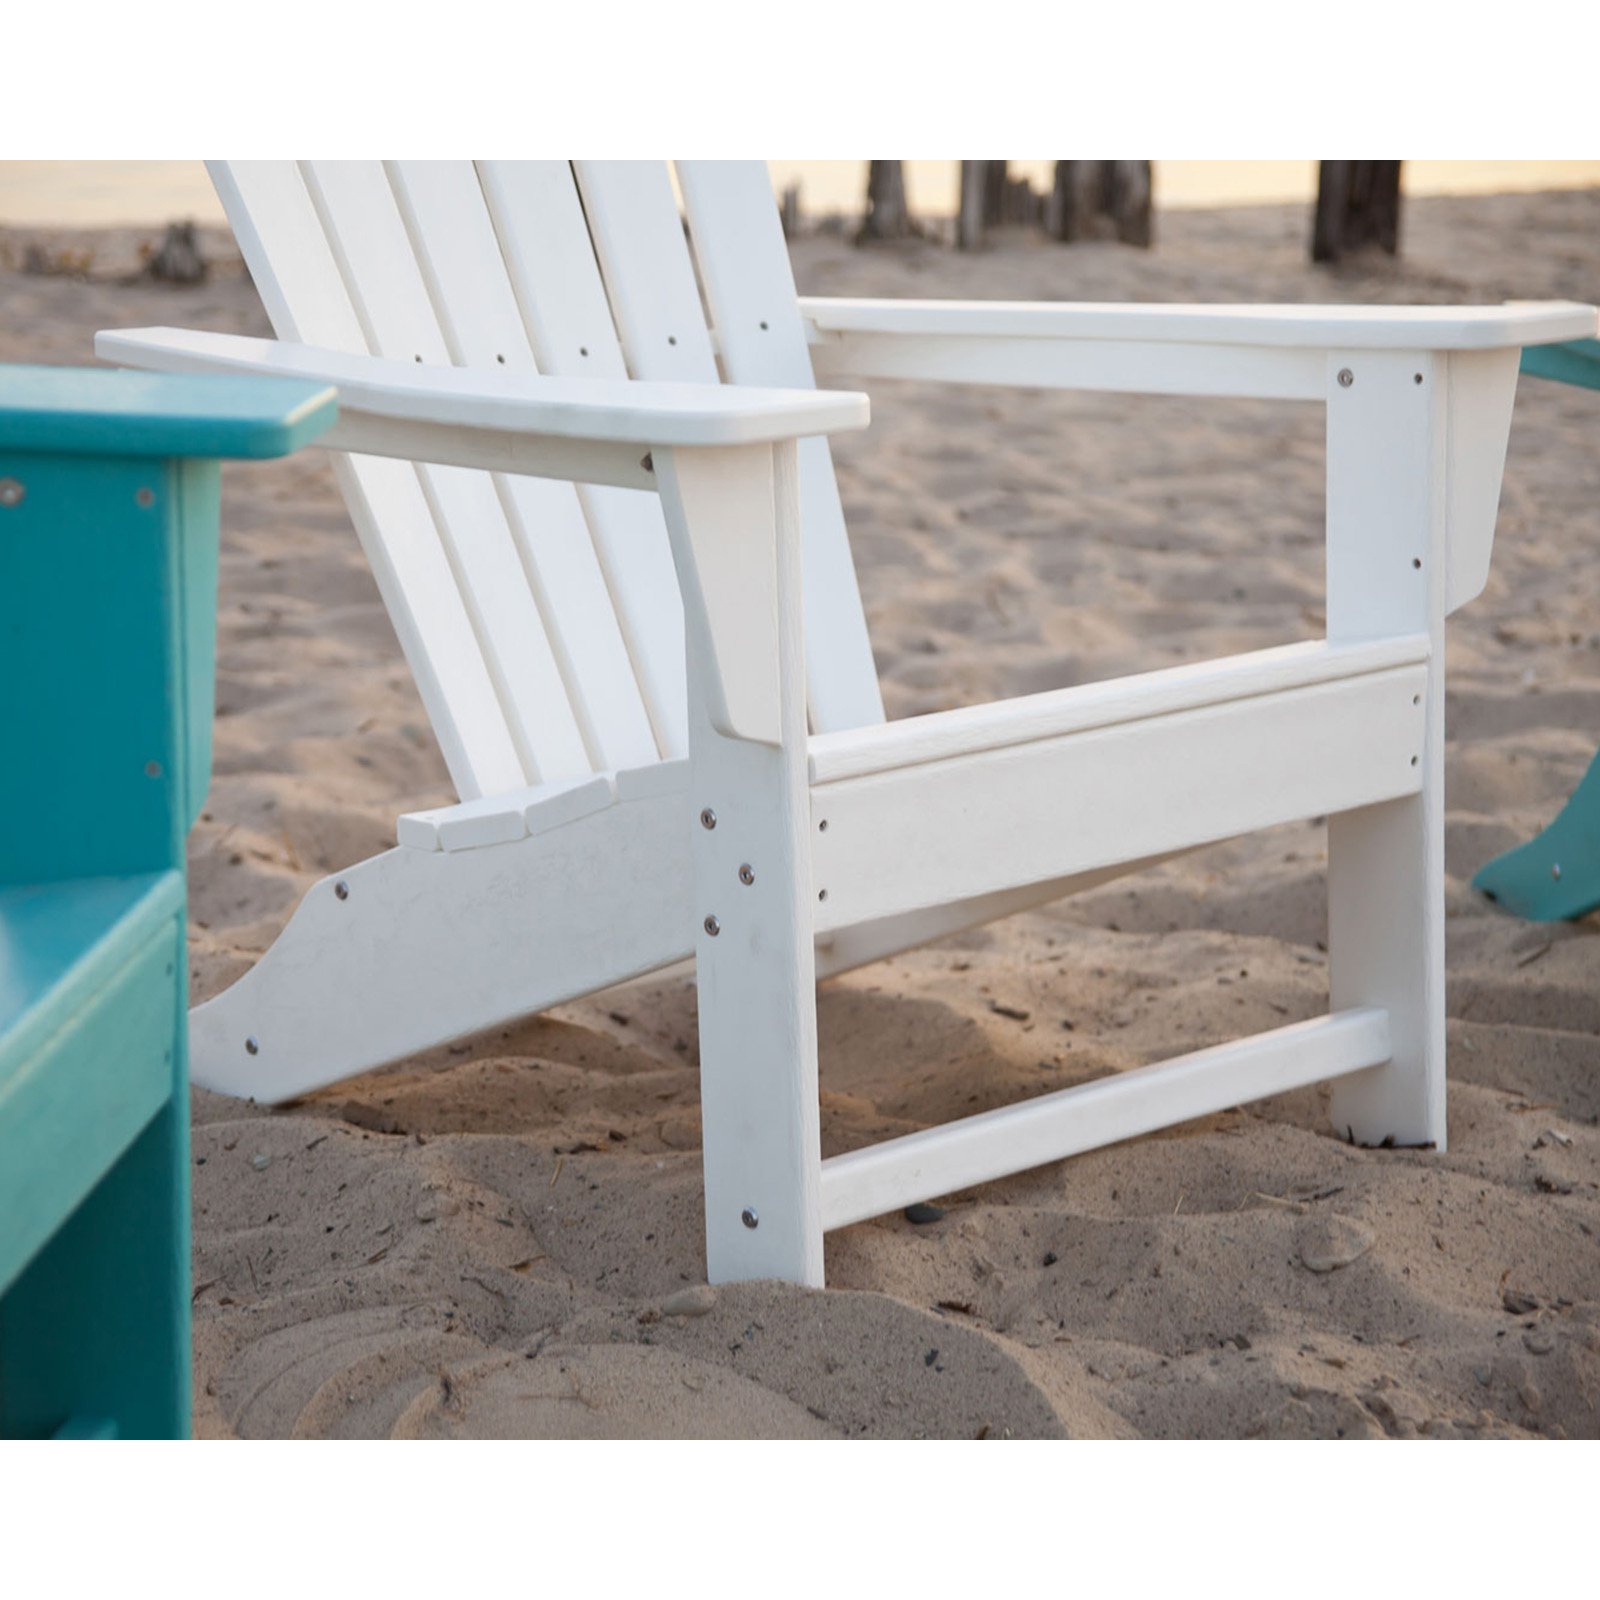 POLYWOOD&reg; South Beach Recycled Plastic Adirondack Chair - image 5 of 11